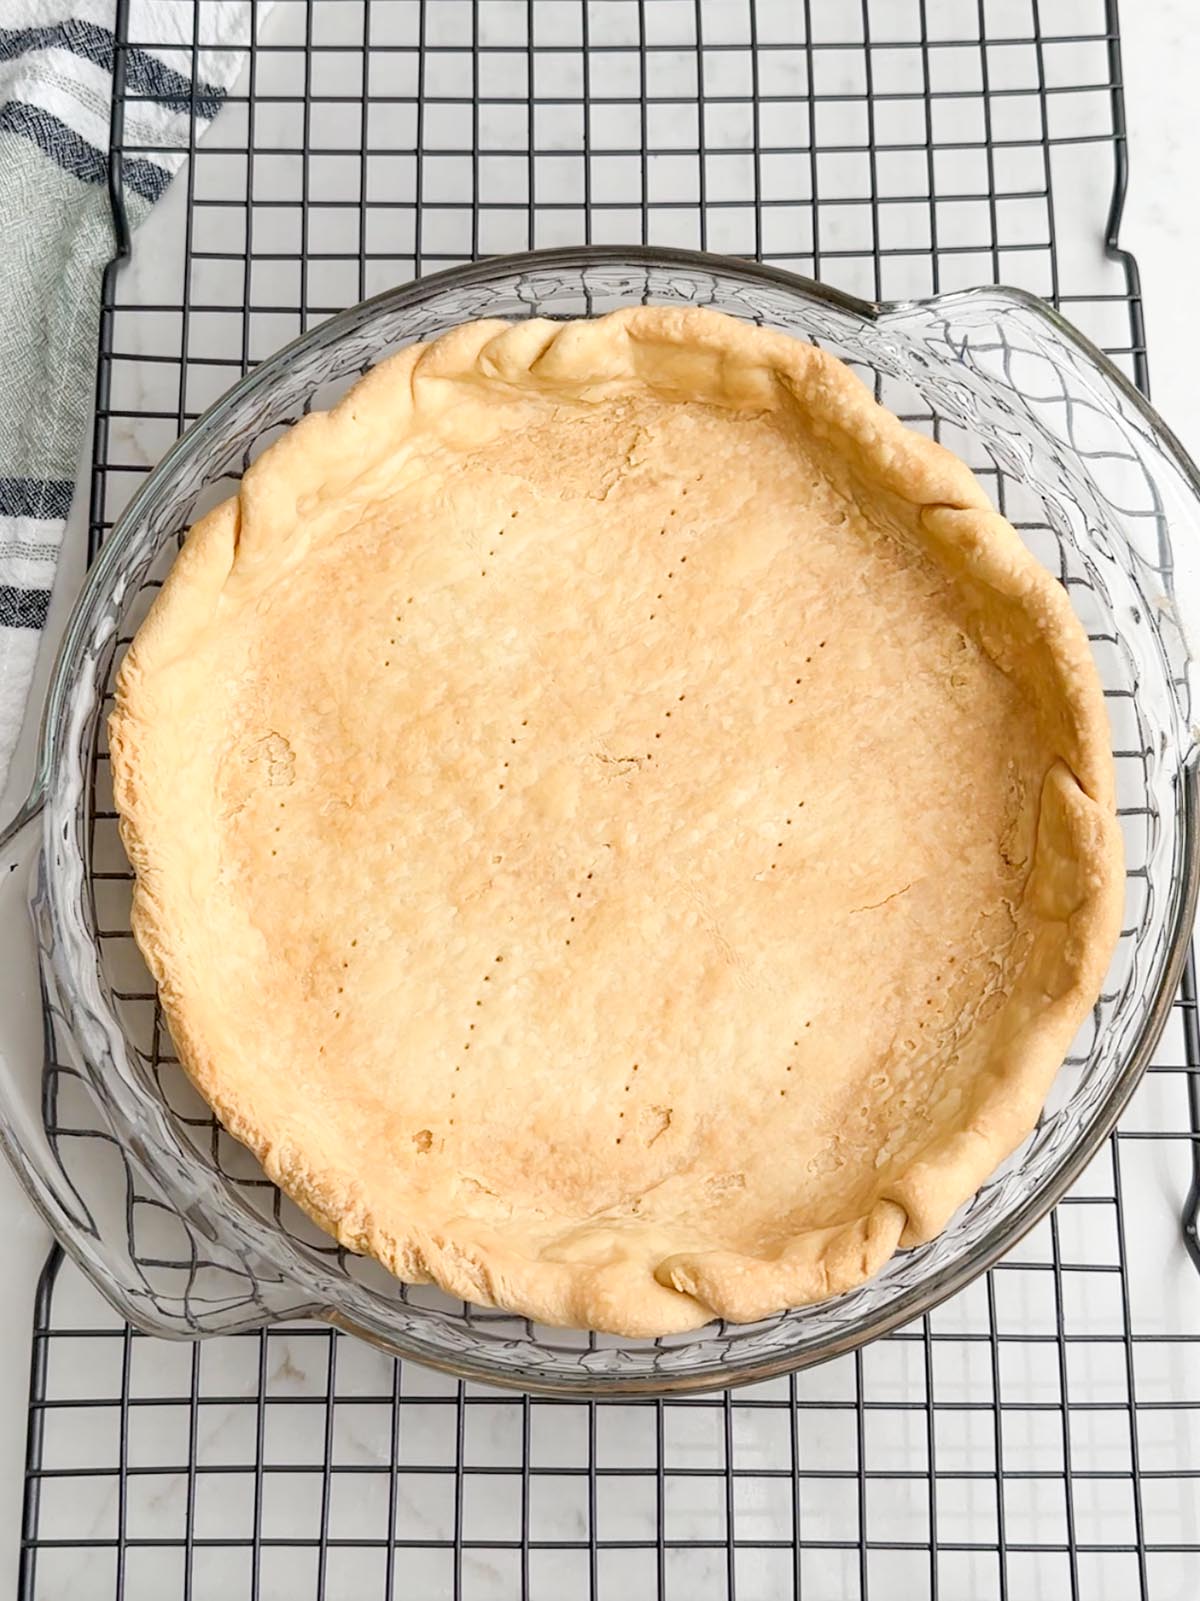 Blind baked pie crust in a clear pie plate.